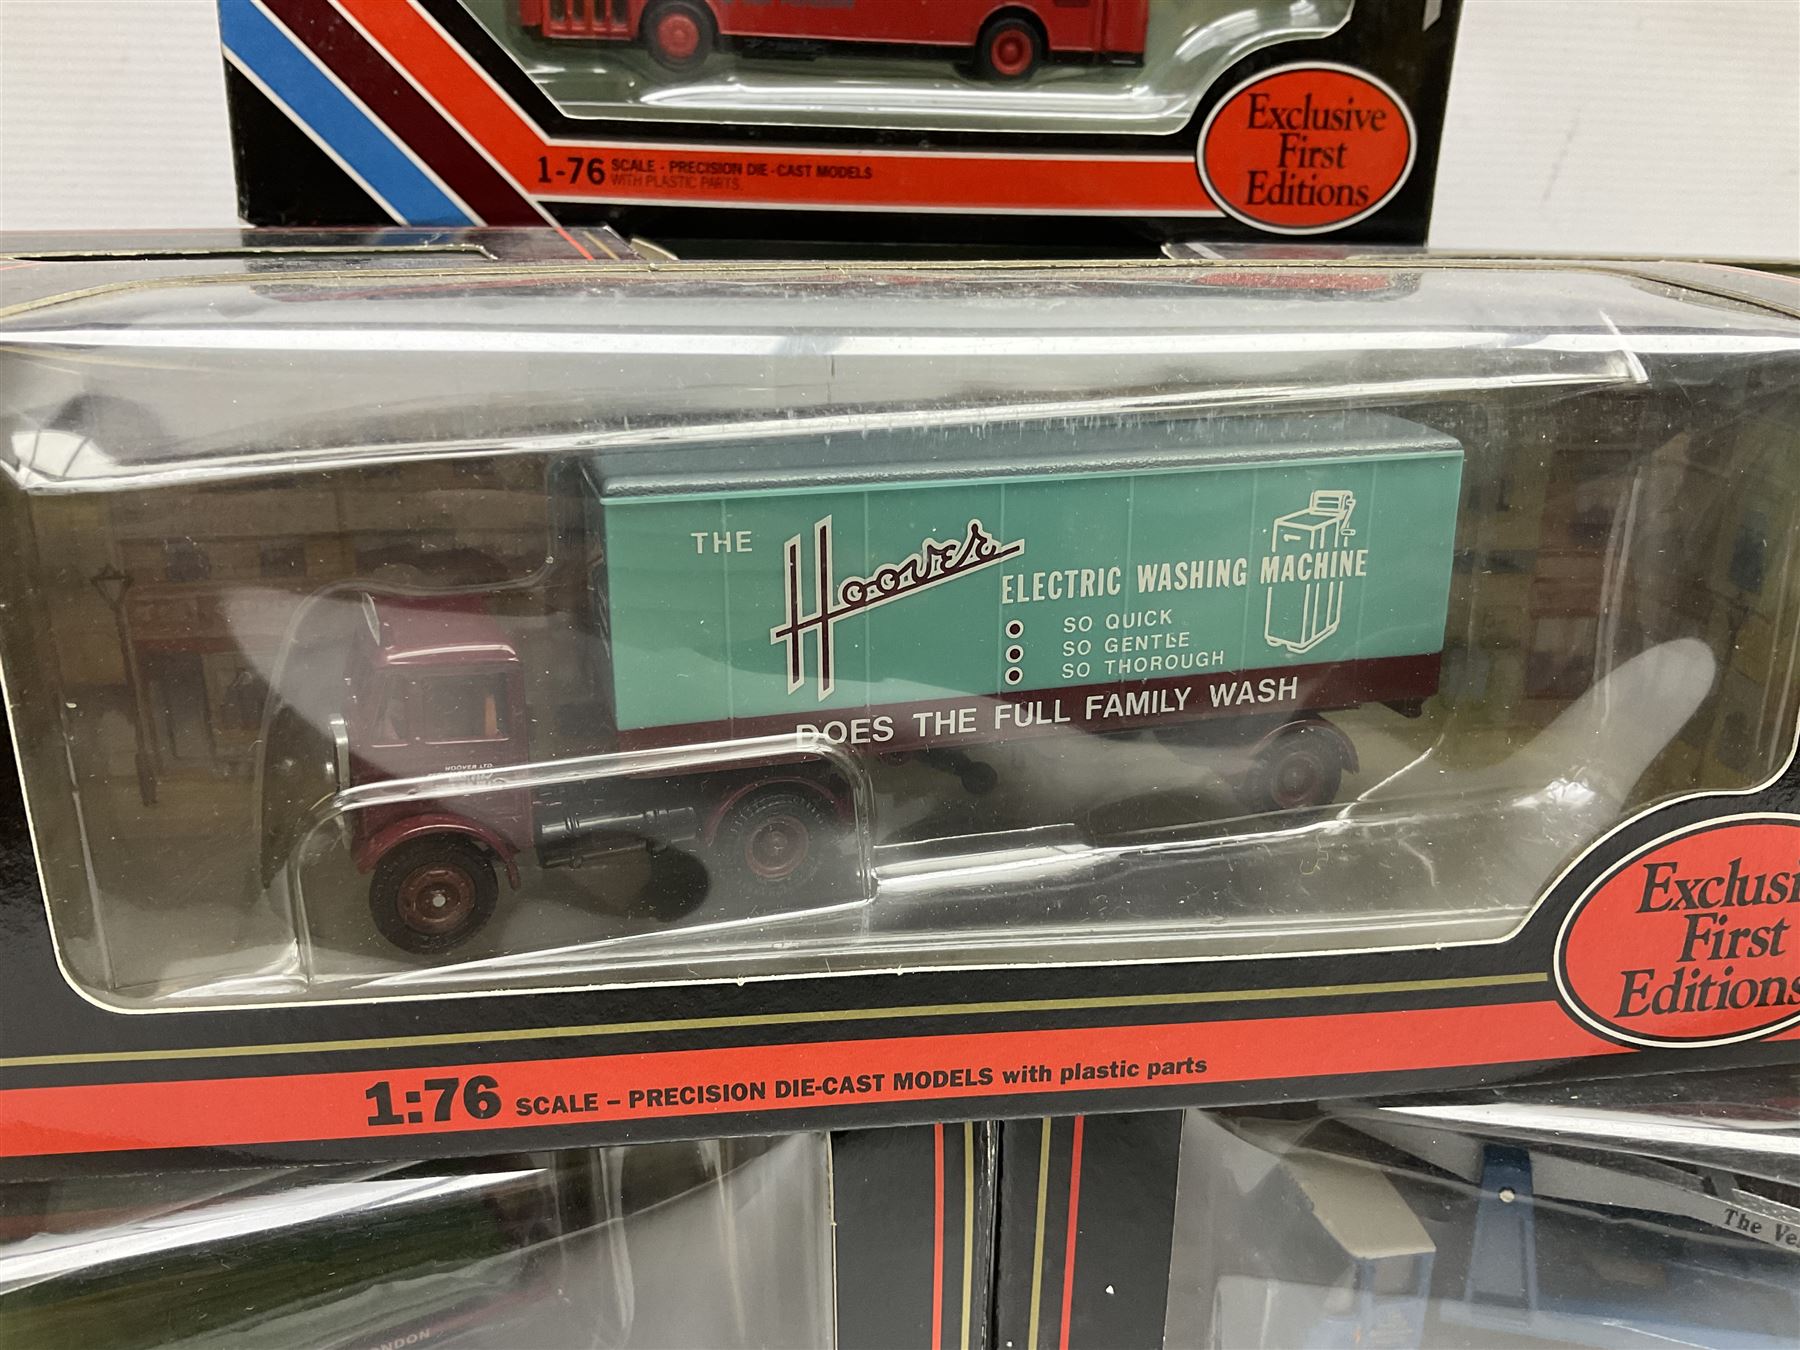 Ten Exclusive First Editions 1:76 scale die-cast models - Image 2 of 7